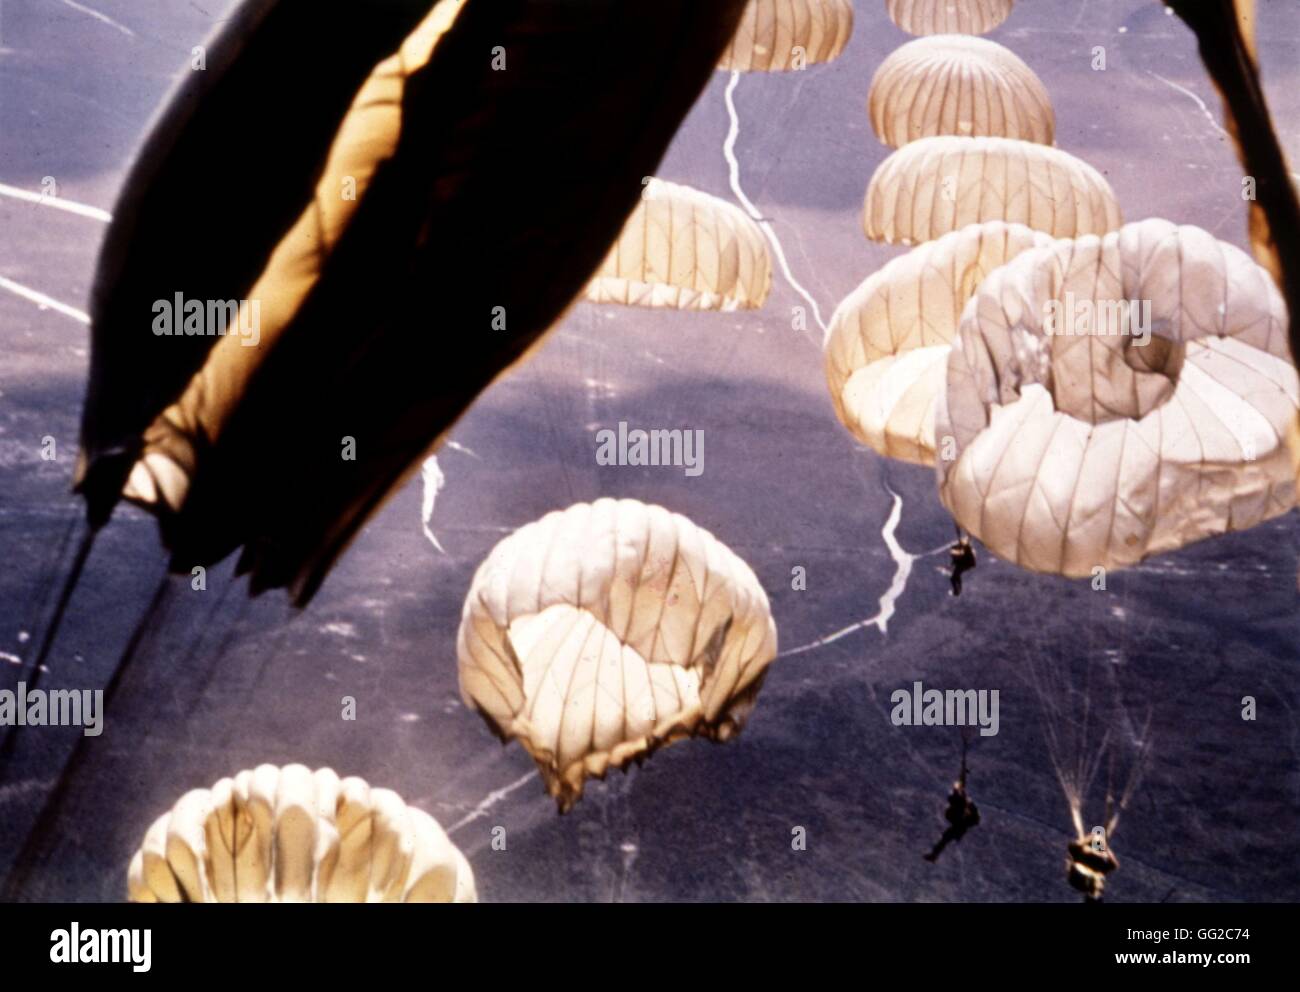 Troops parachuted in South East Asia c. 1968 Vietnam War U.S. Air Force Stock Photo